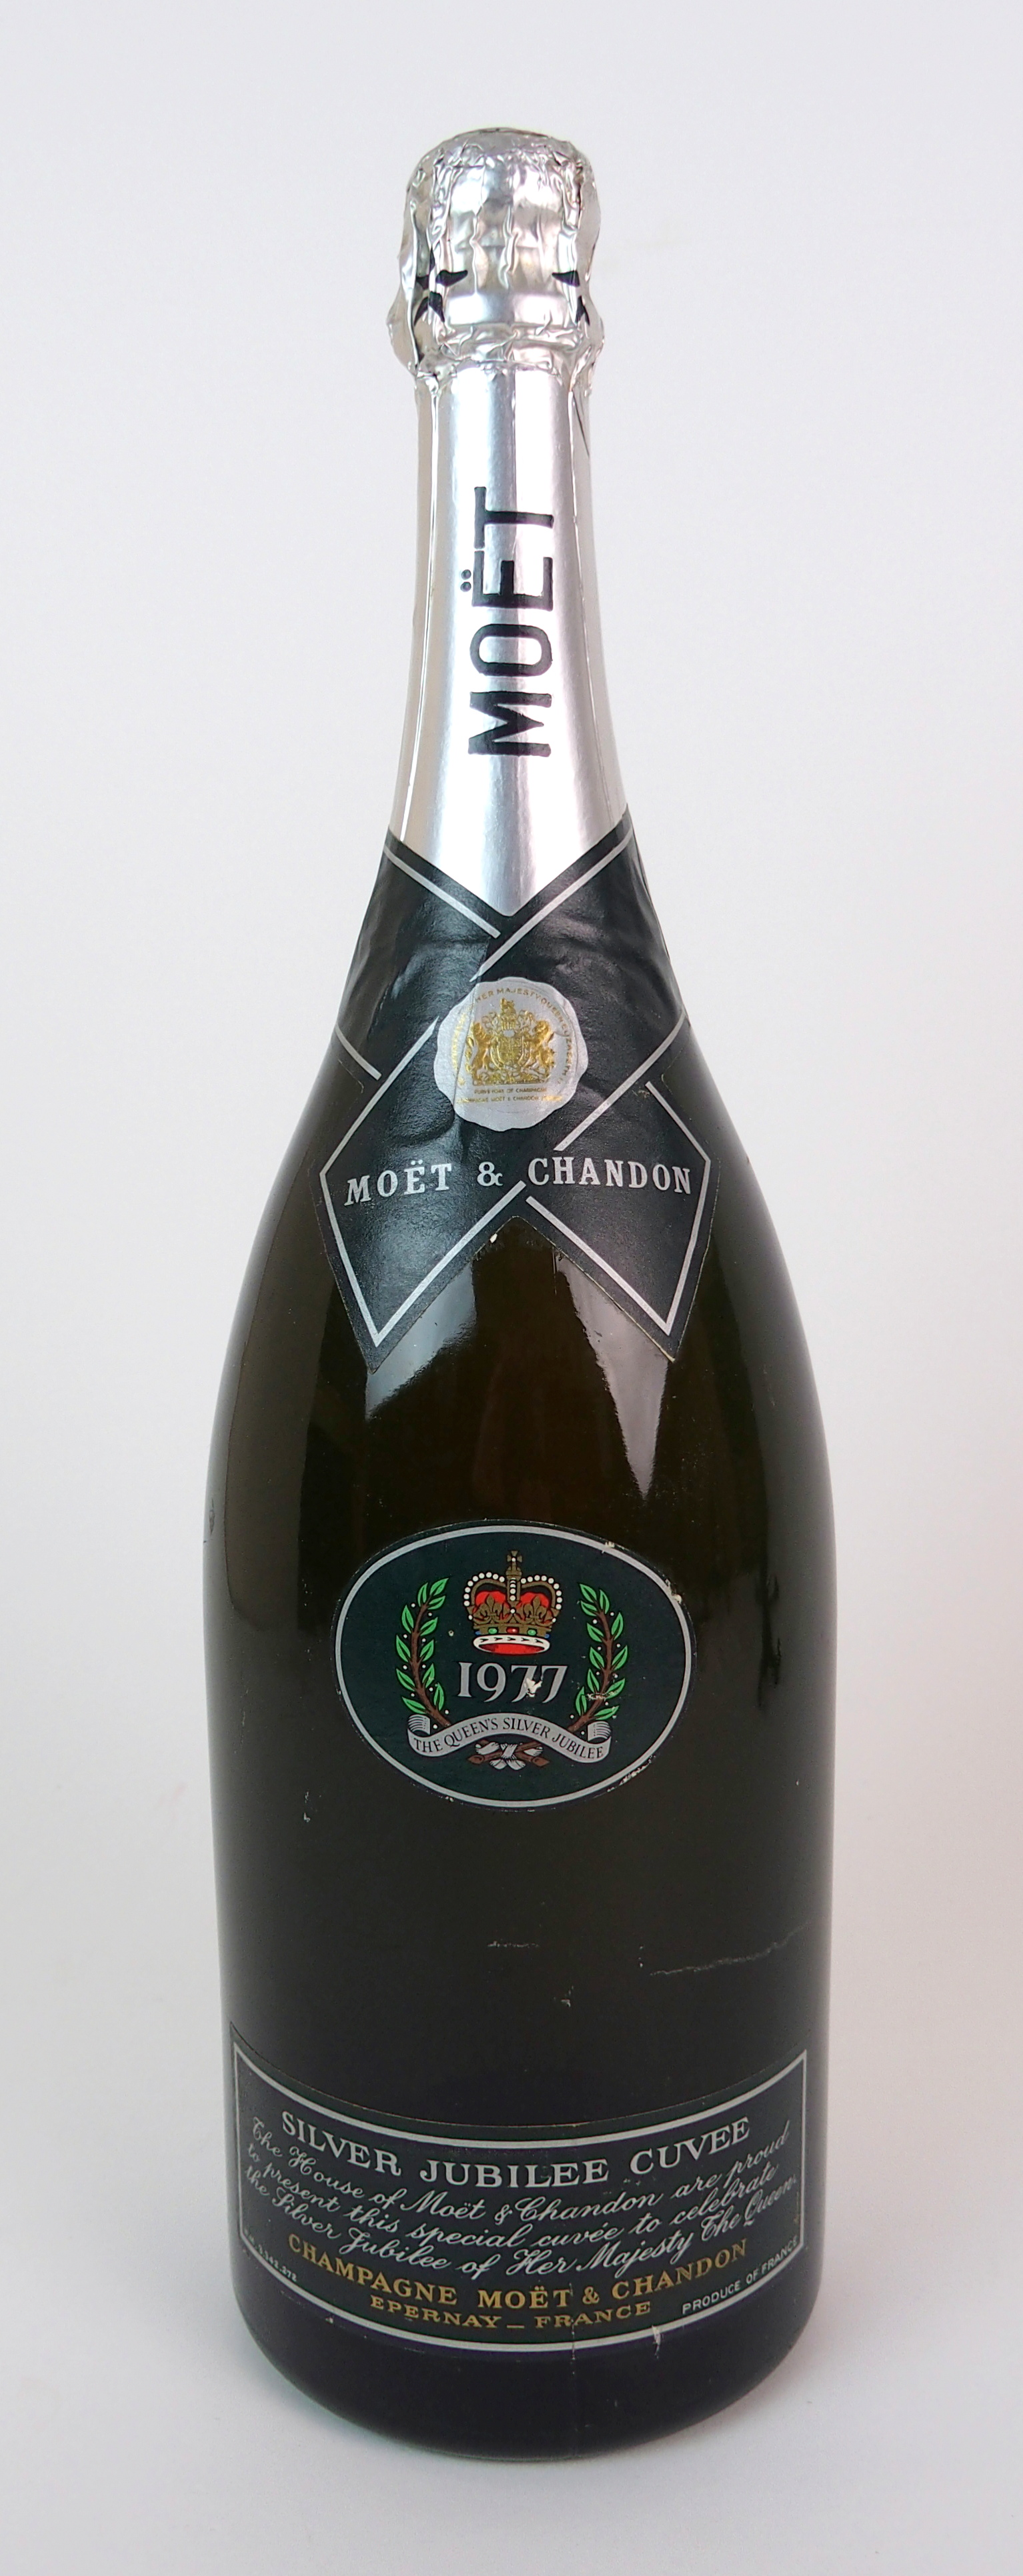 A magnum bottle of Moet & Chandon "Silver Jubilee Cuvee" Champagne 1977, marking Queen's Silver